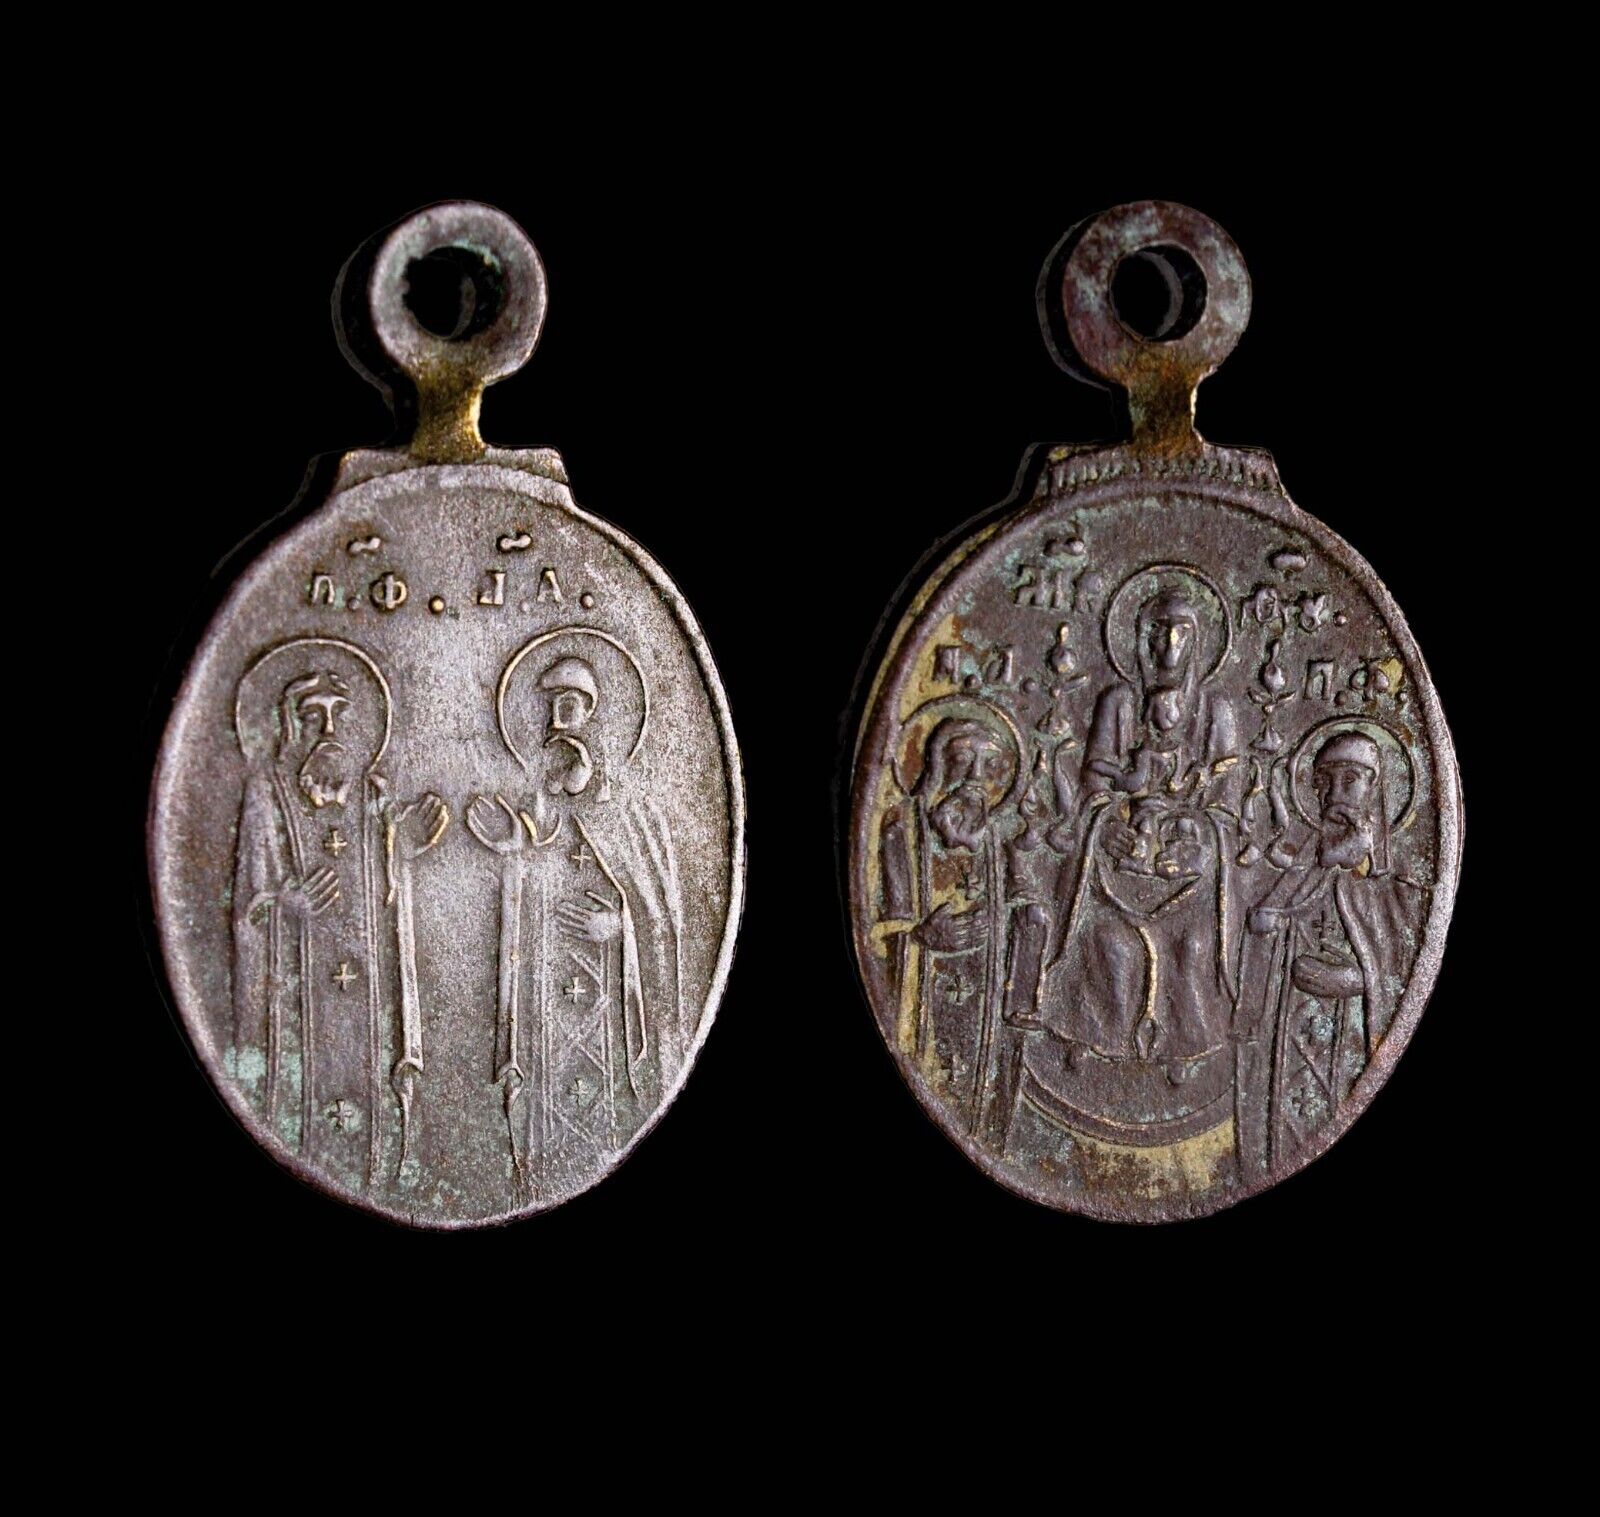 Exceptional Pendant CRUSADER Knight Templar Scene of Christ with Apostles Silver